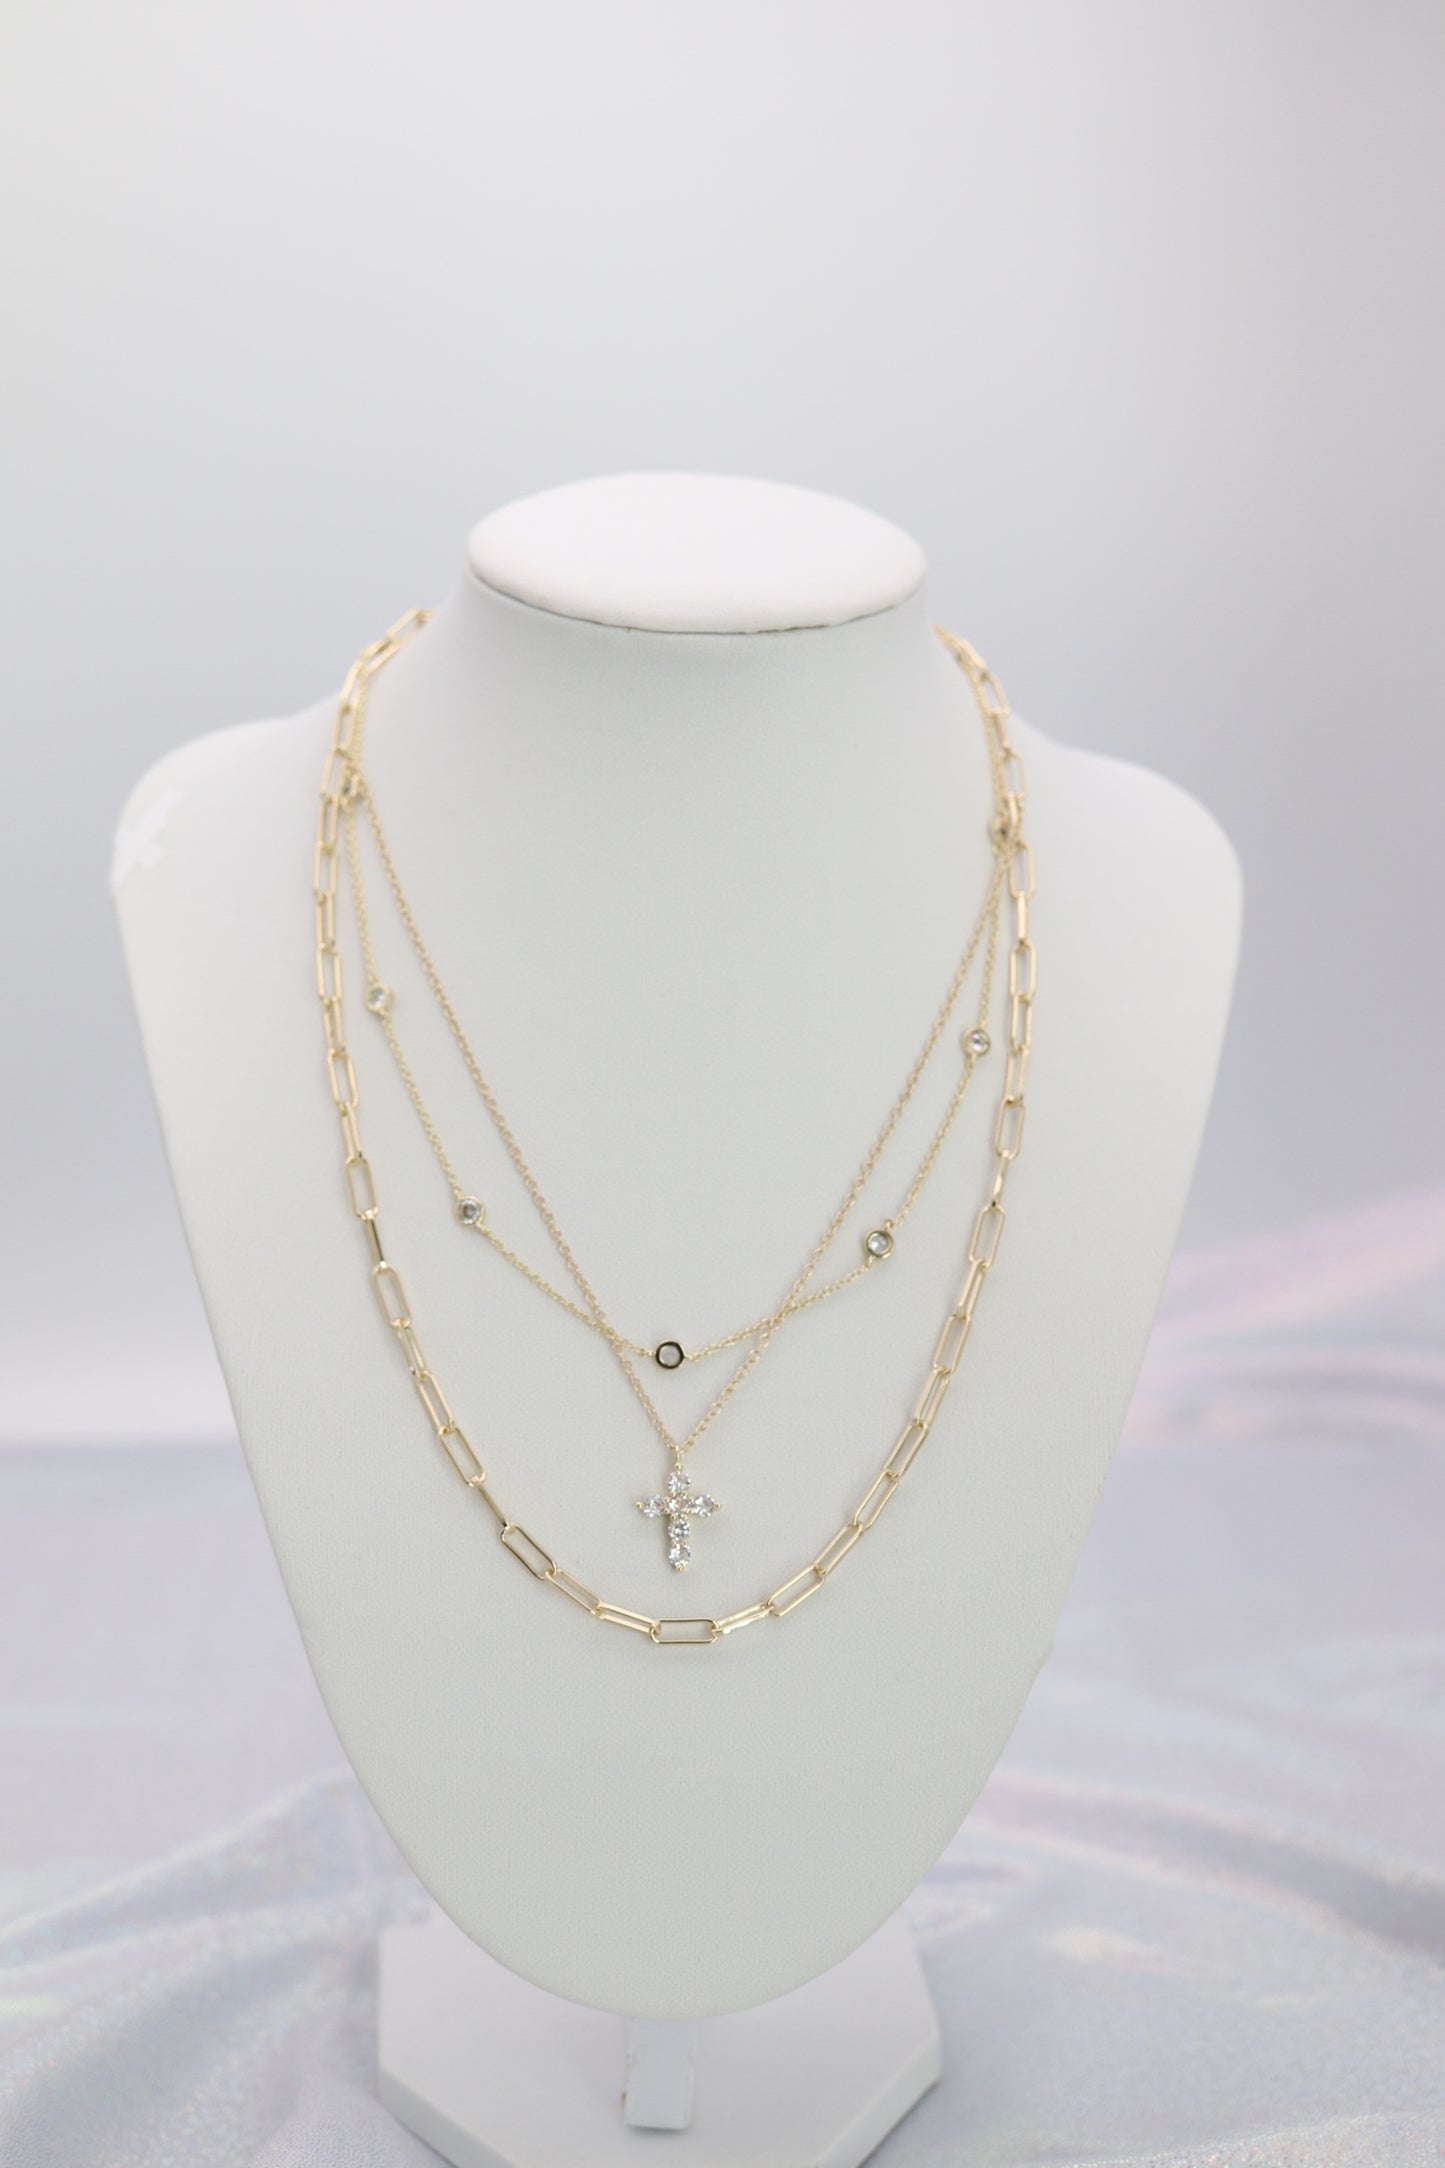 Triple Strand Necklace in Gold With Cross Pendant